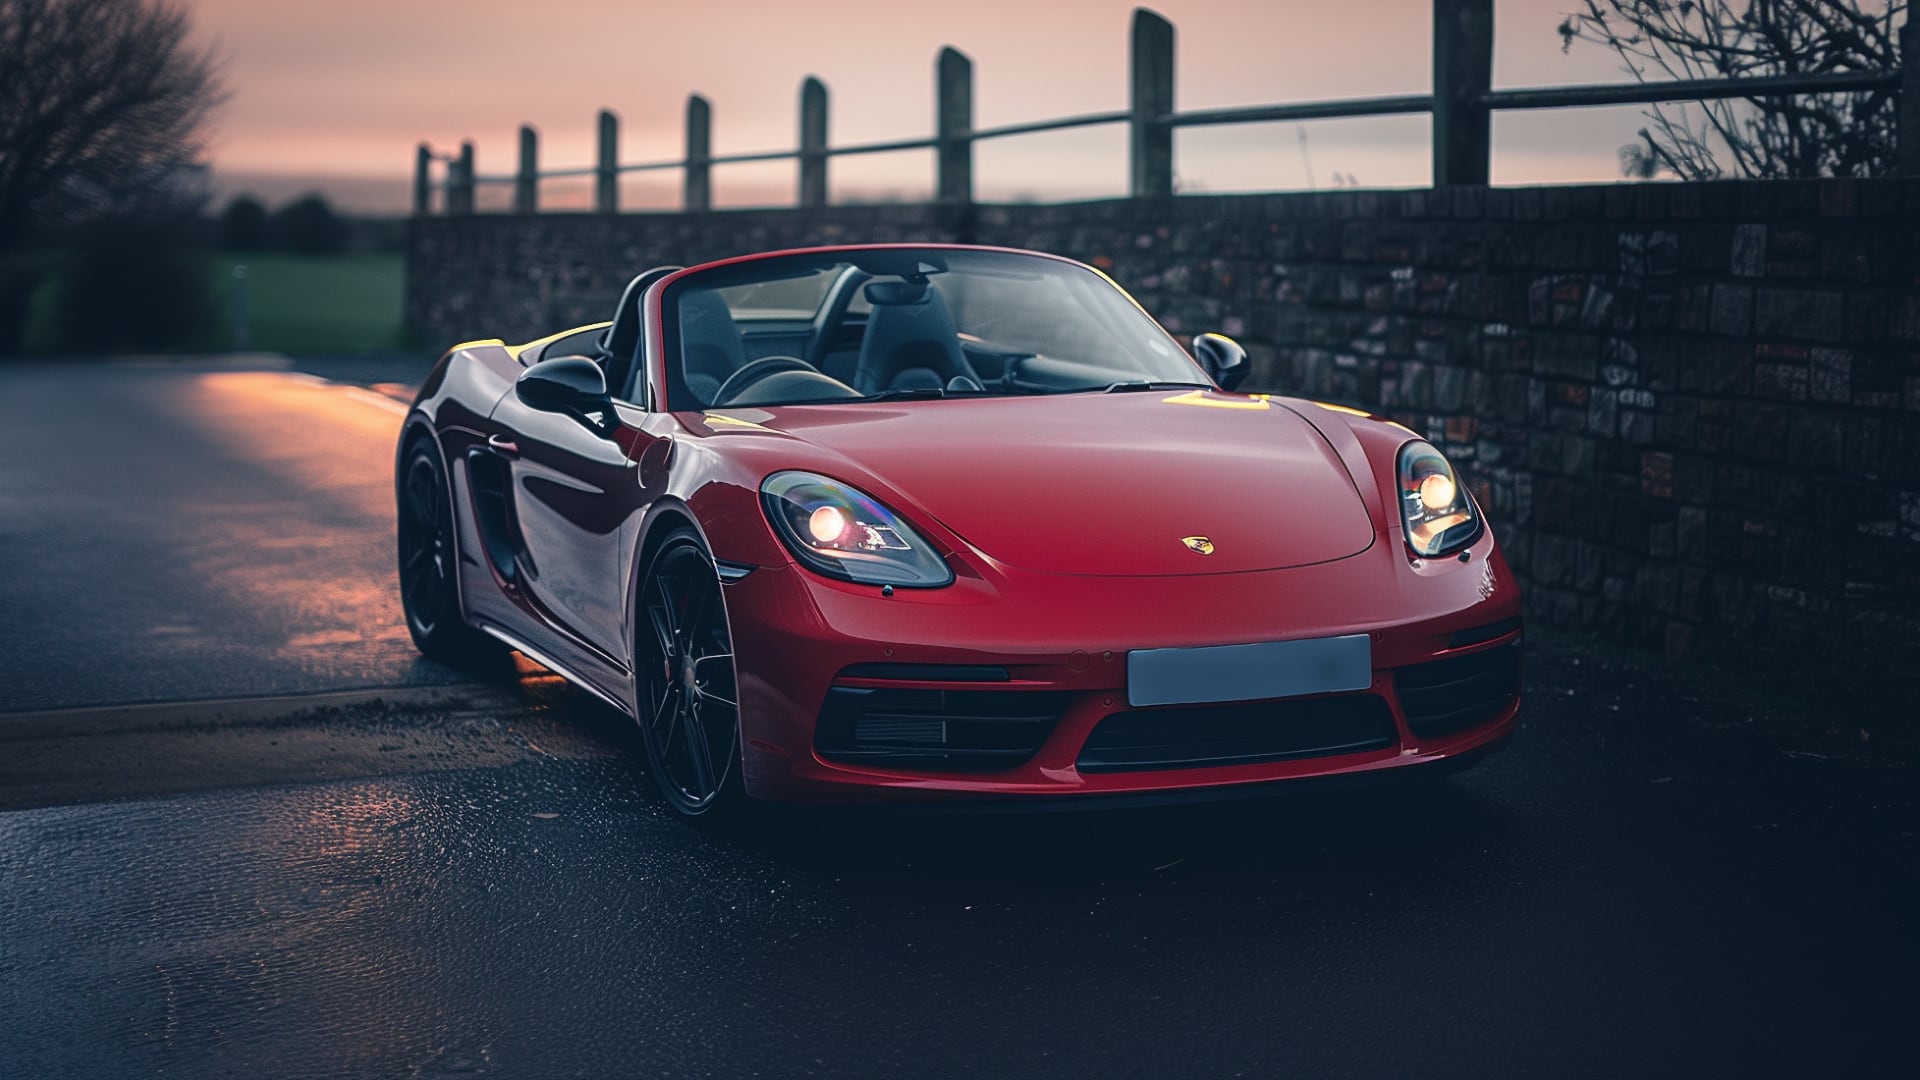 A red Porsche Boxster sports car parked on the side of a road, avoiding the years to be wary of.